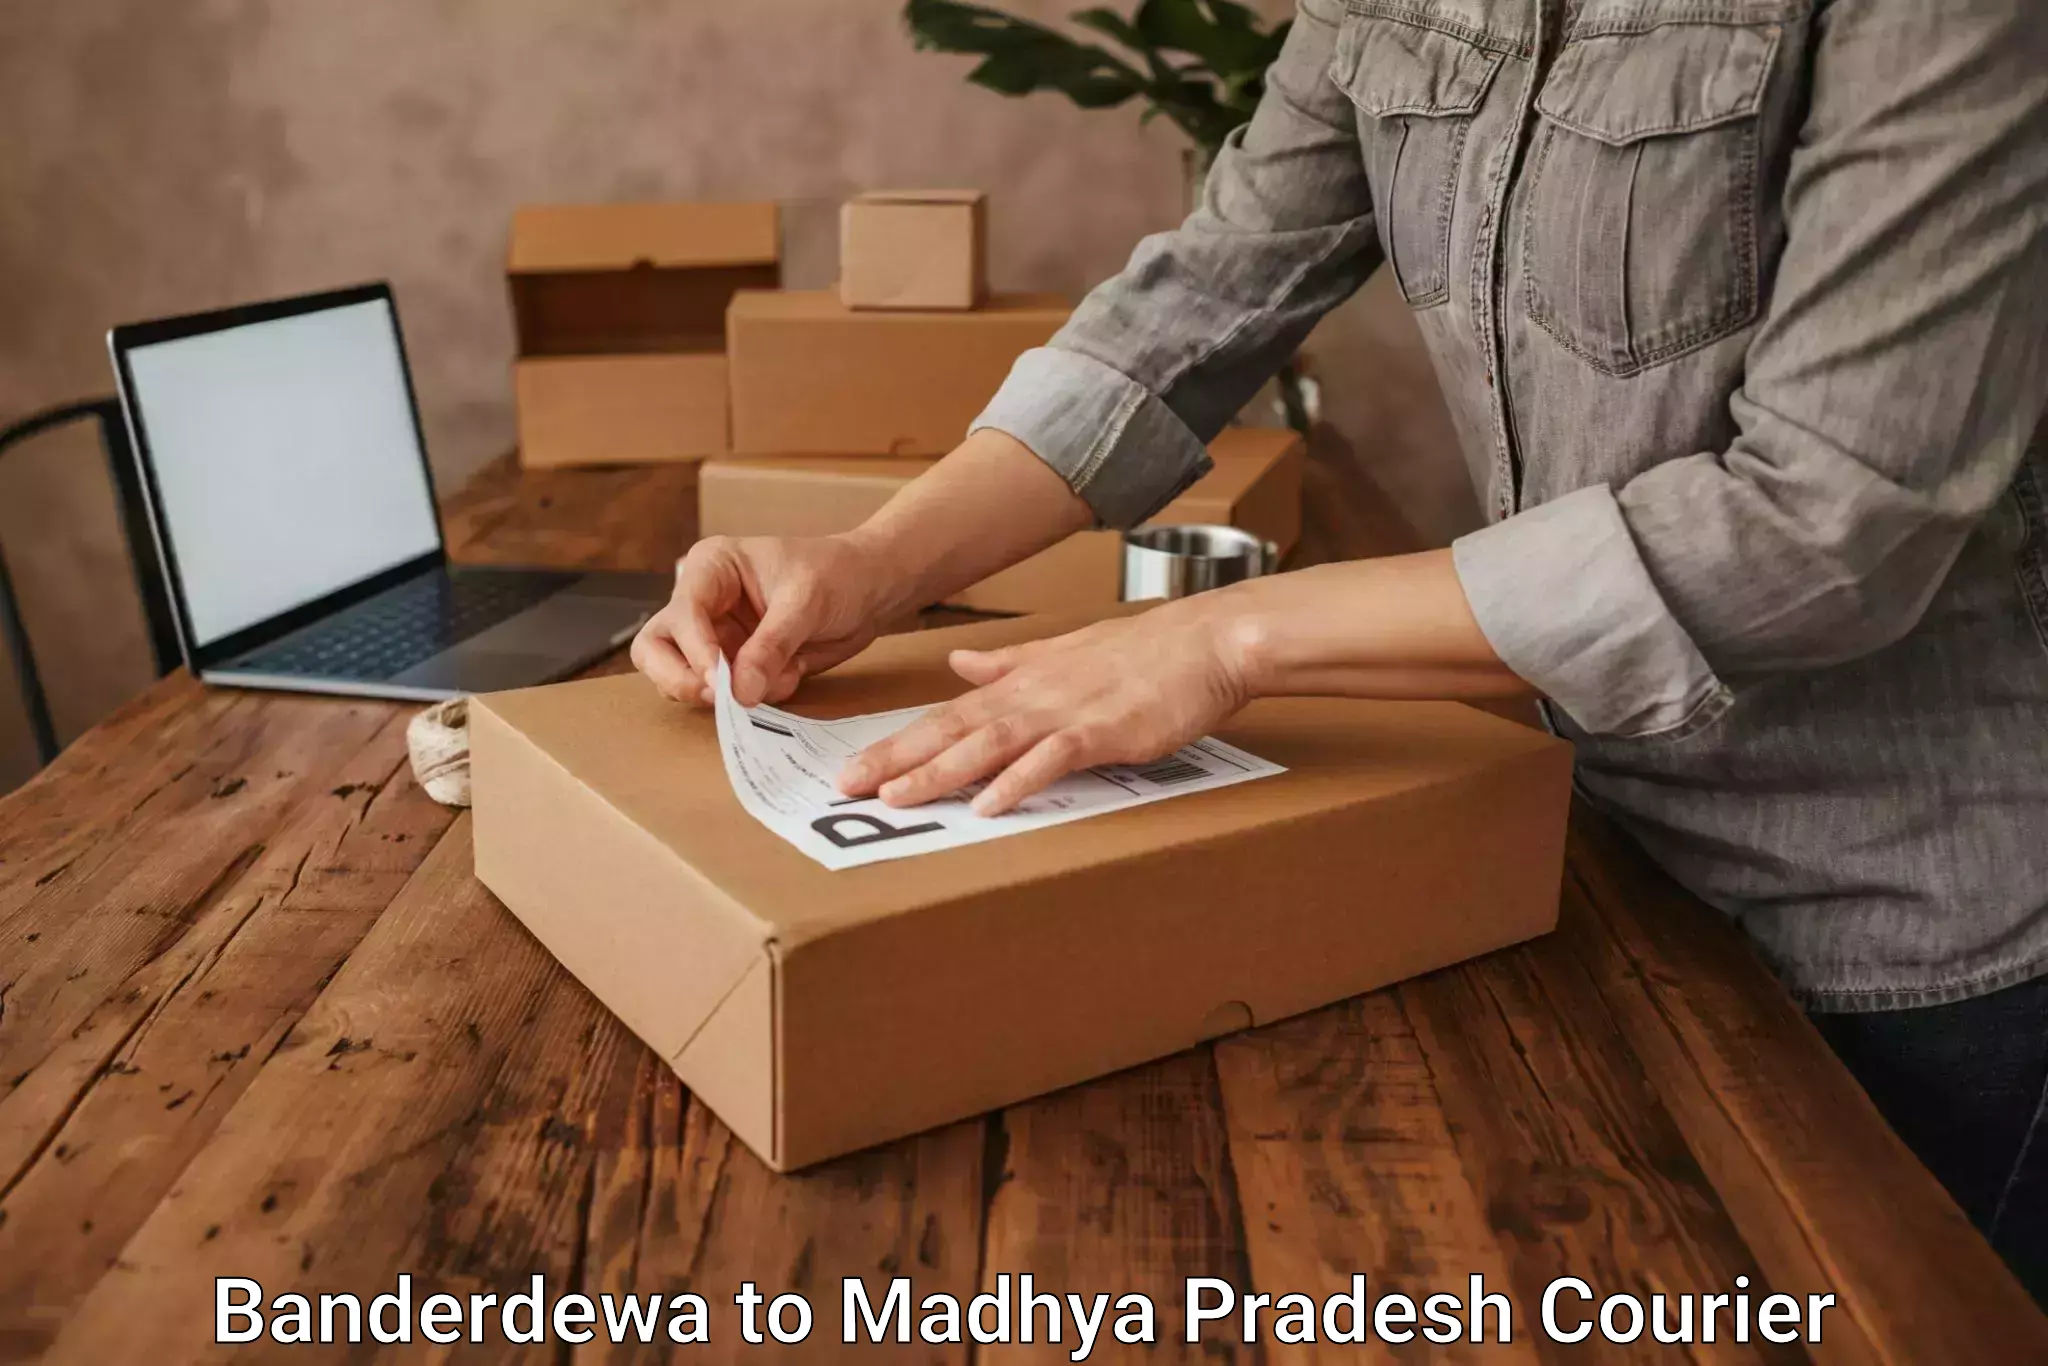 State-of-the-art courier technology Banderdewa to Nagod